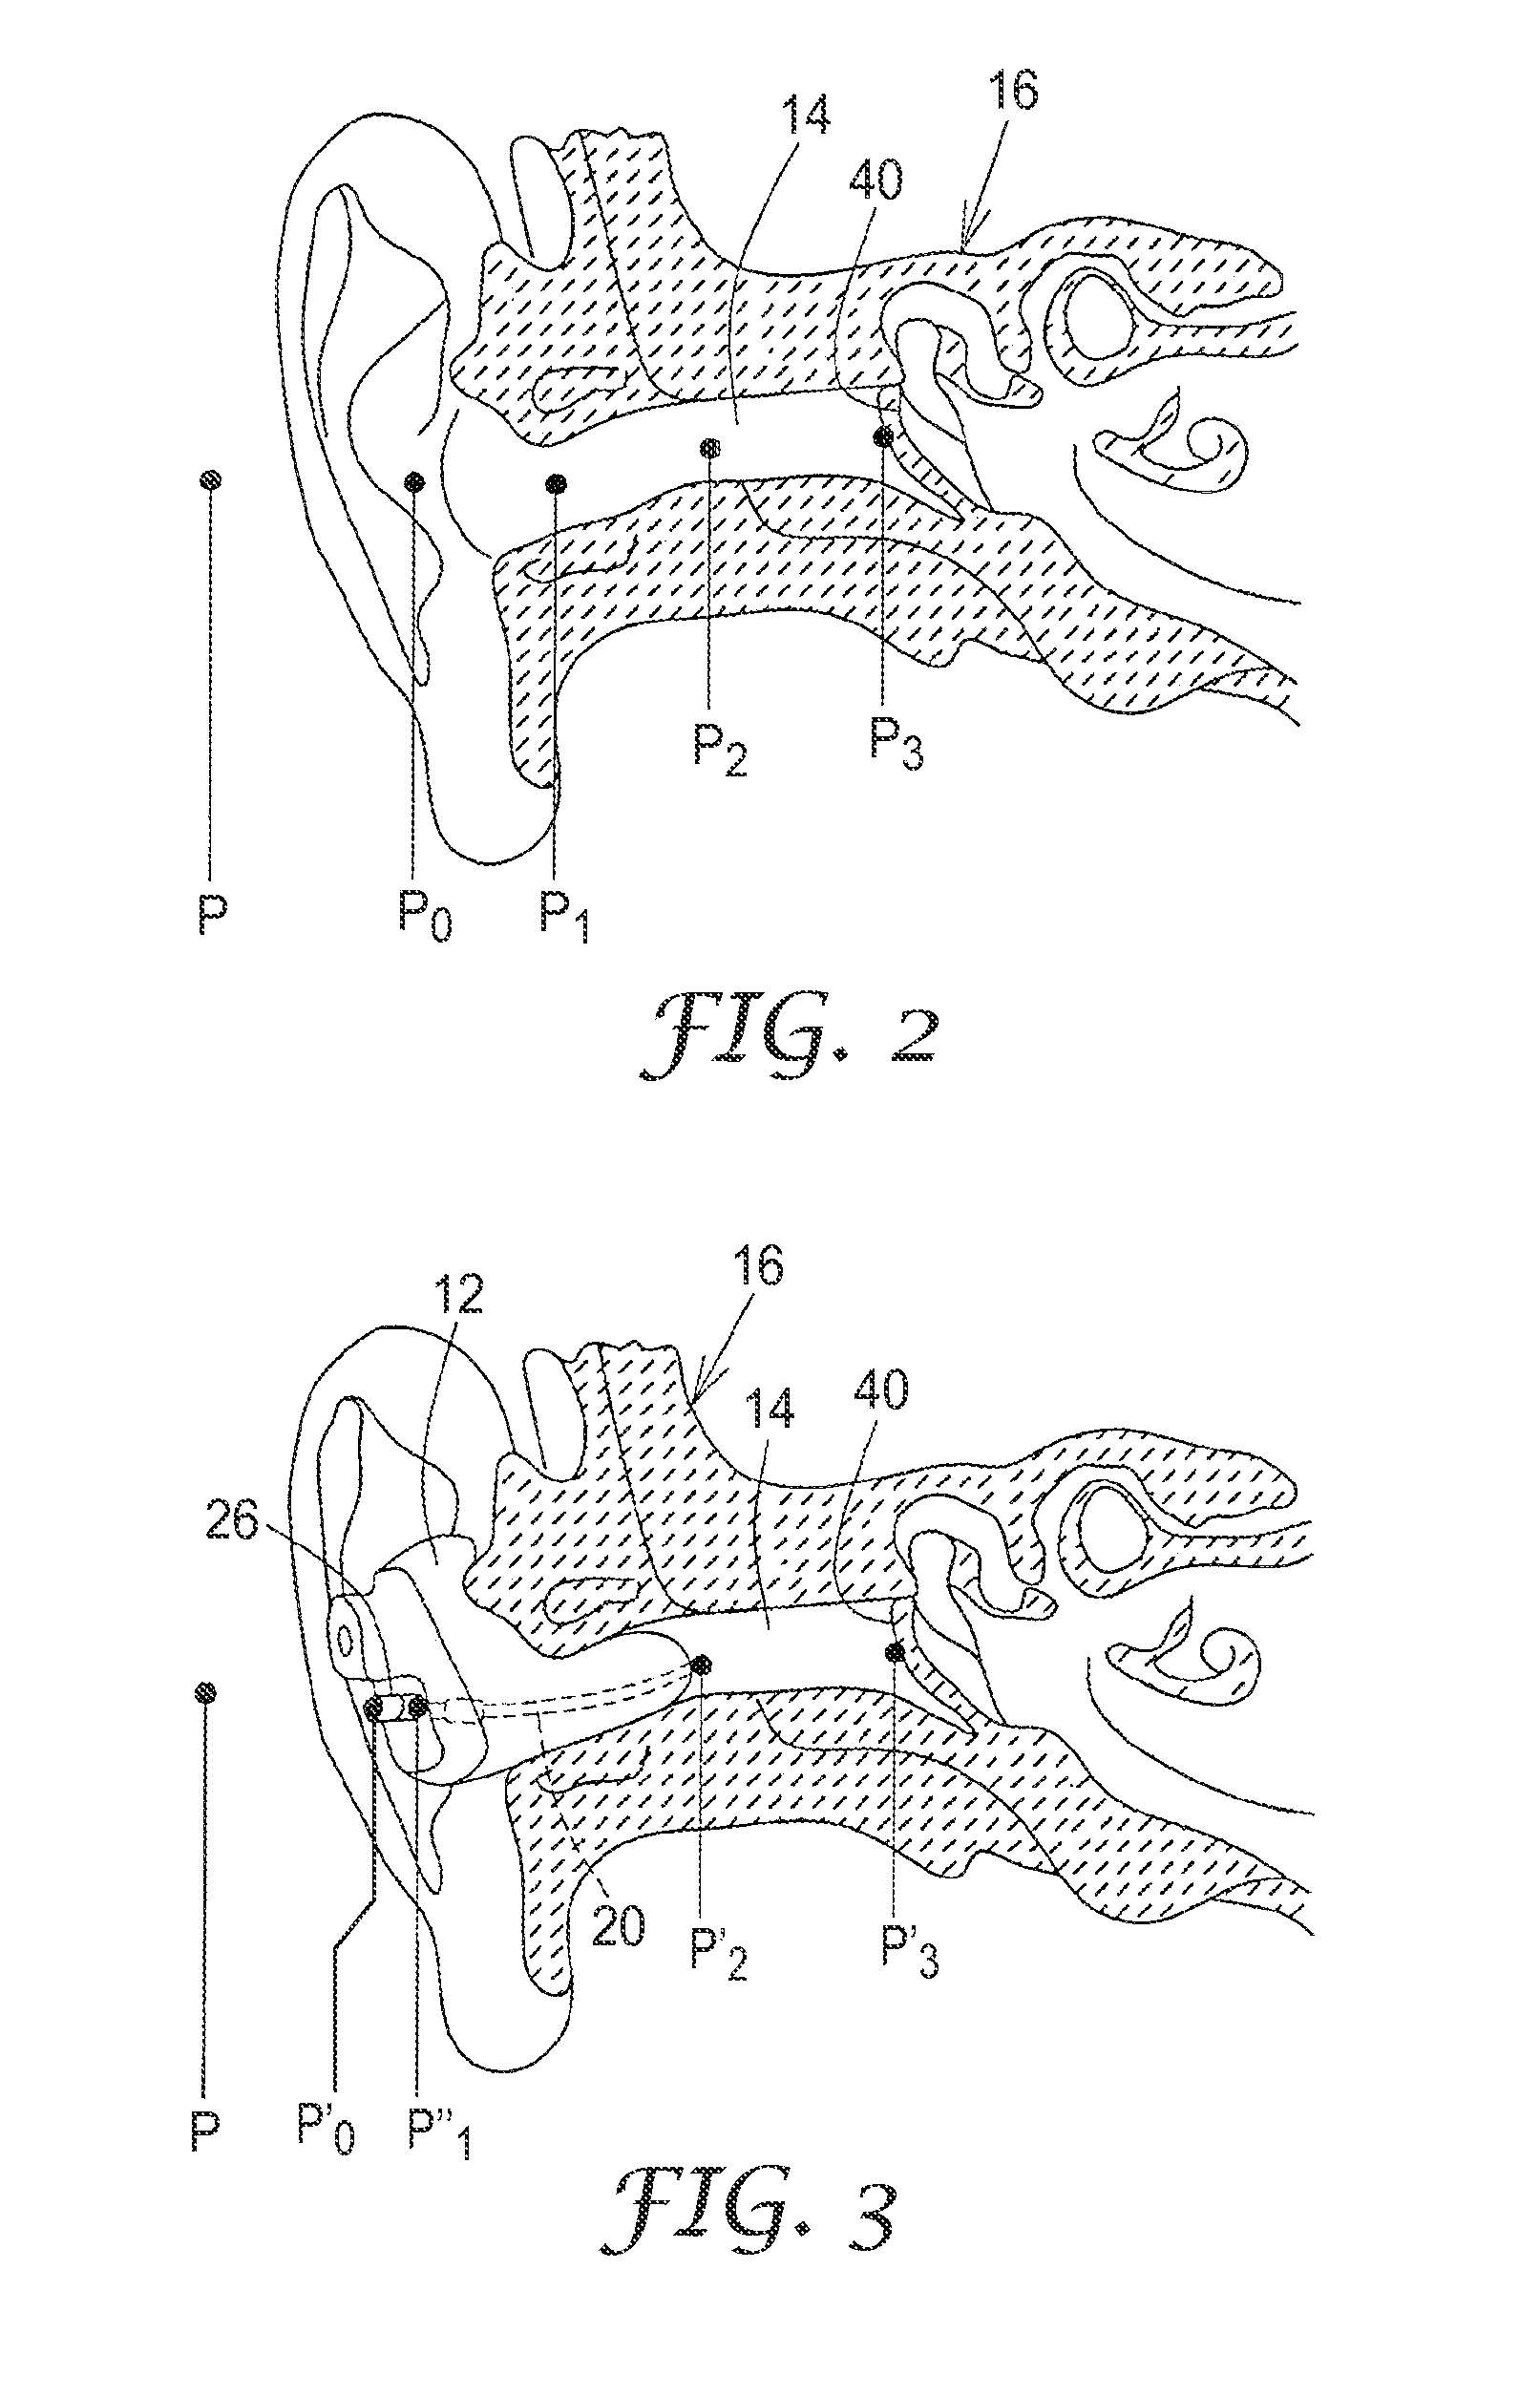 Method and apparatus for objective assessment of in-ear device acoustical performance